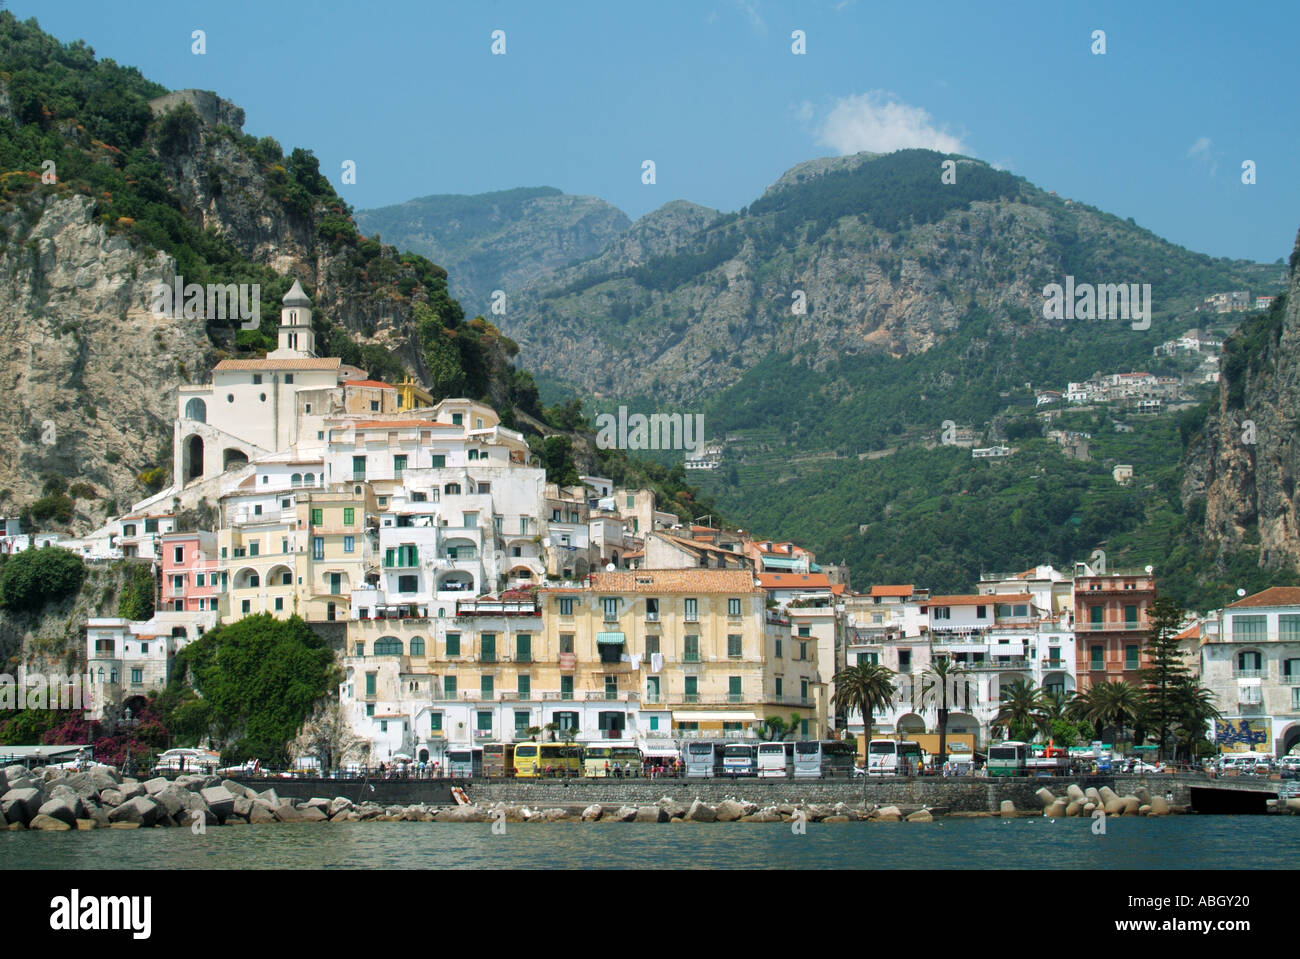 Amalfi town and waterfront with mountains backdrop Stock Photo - Alamy